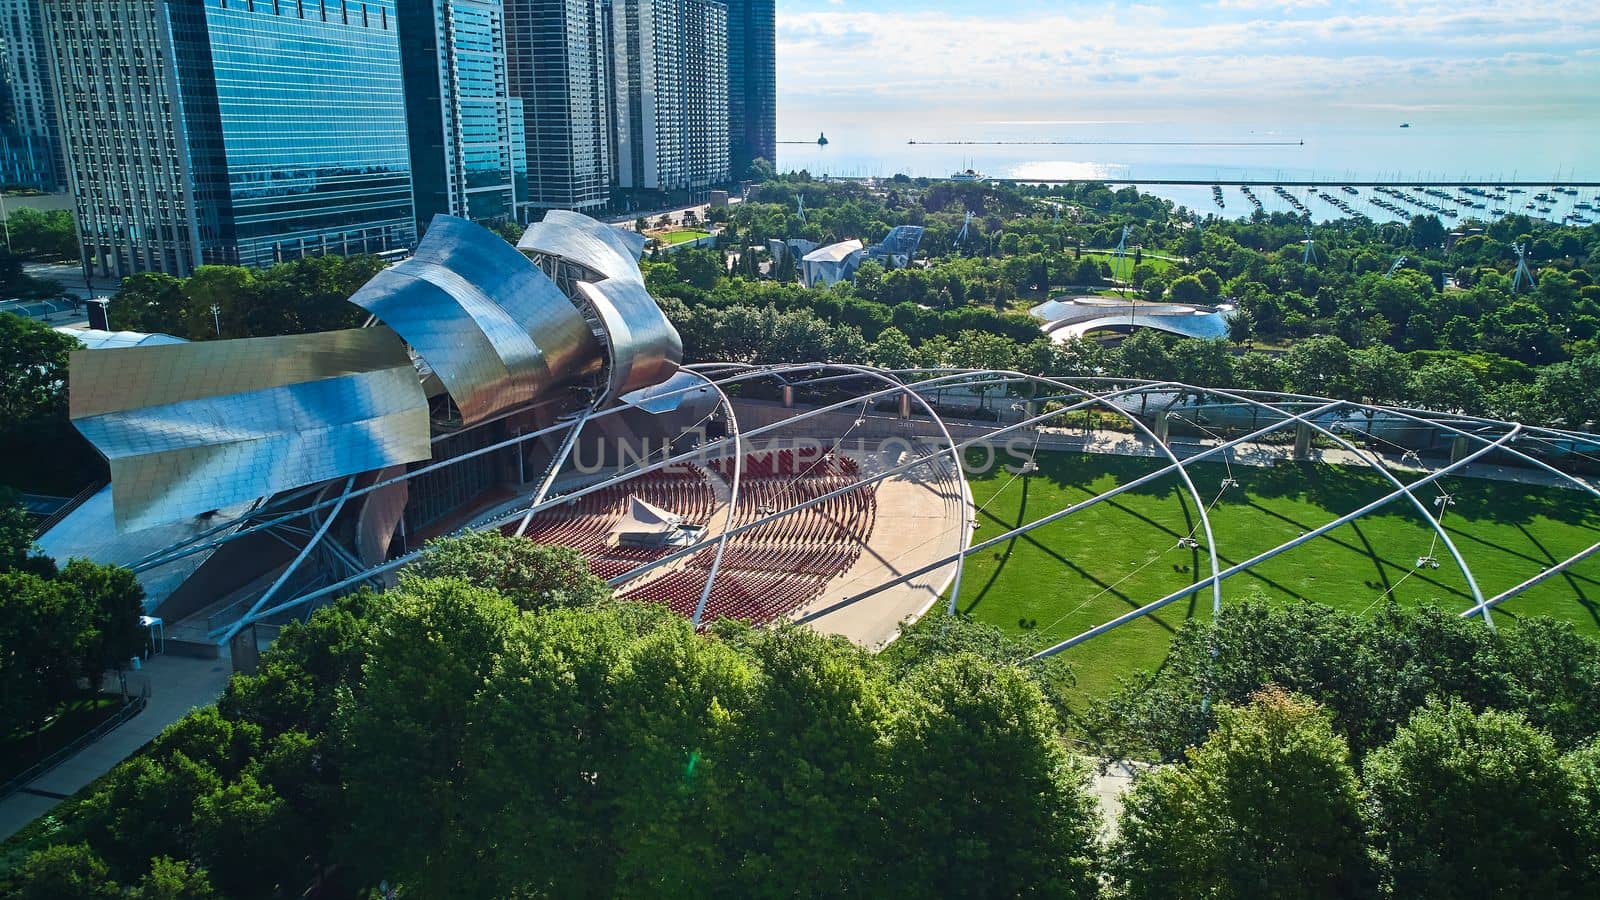 Pavilion in Millennium Park Chicago with view of docks and Lake Michigan by njproductions